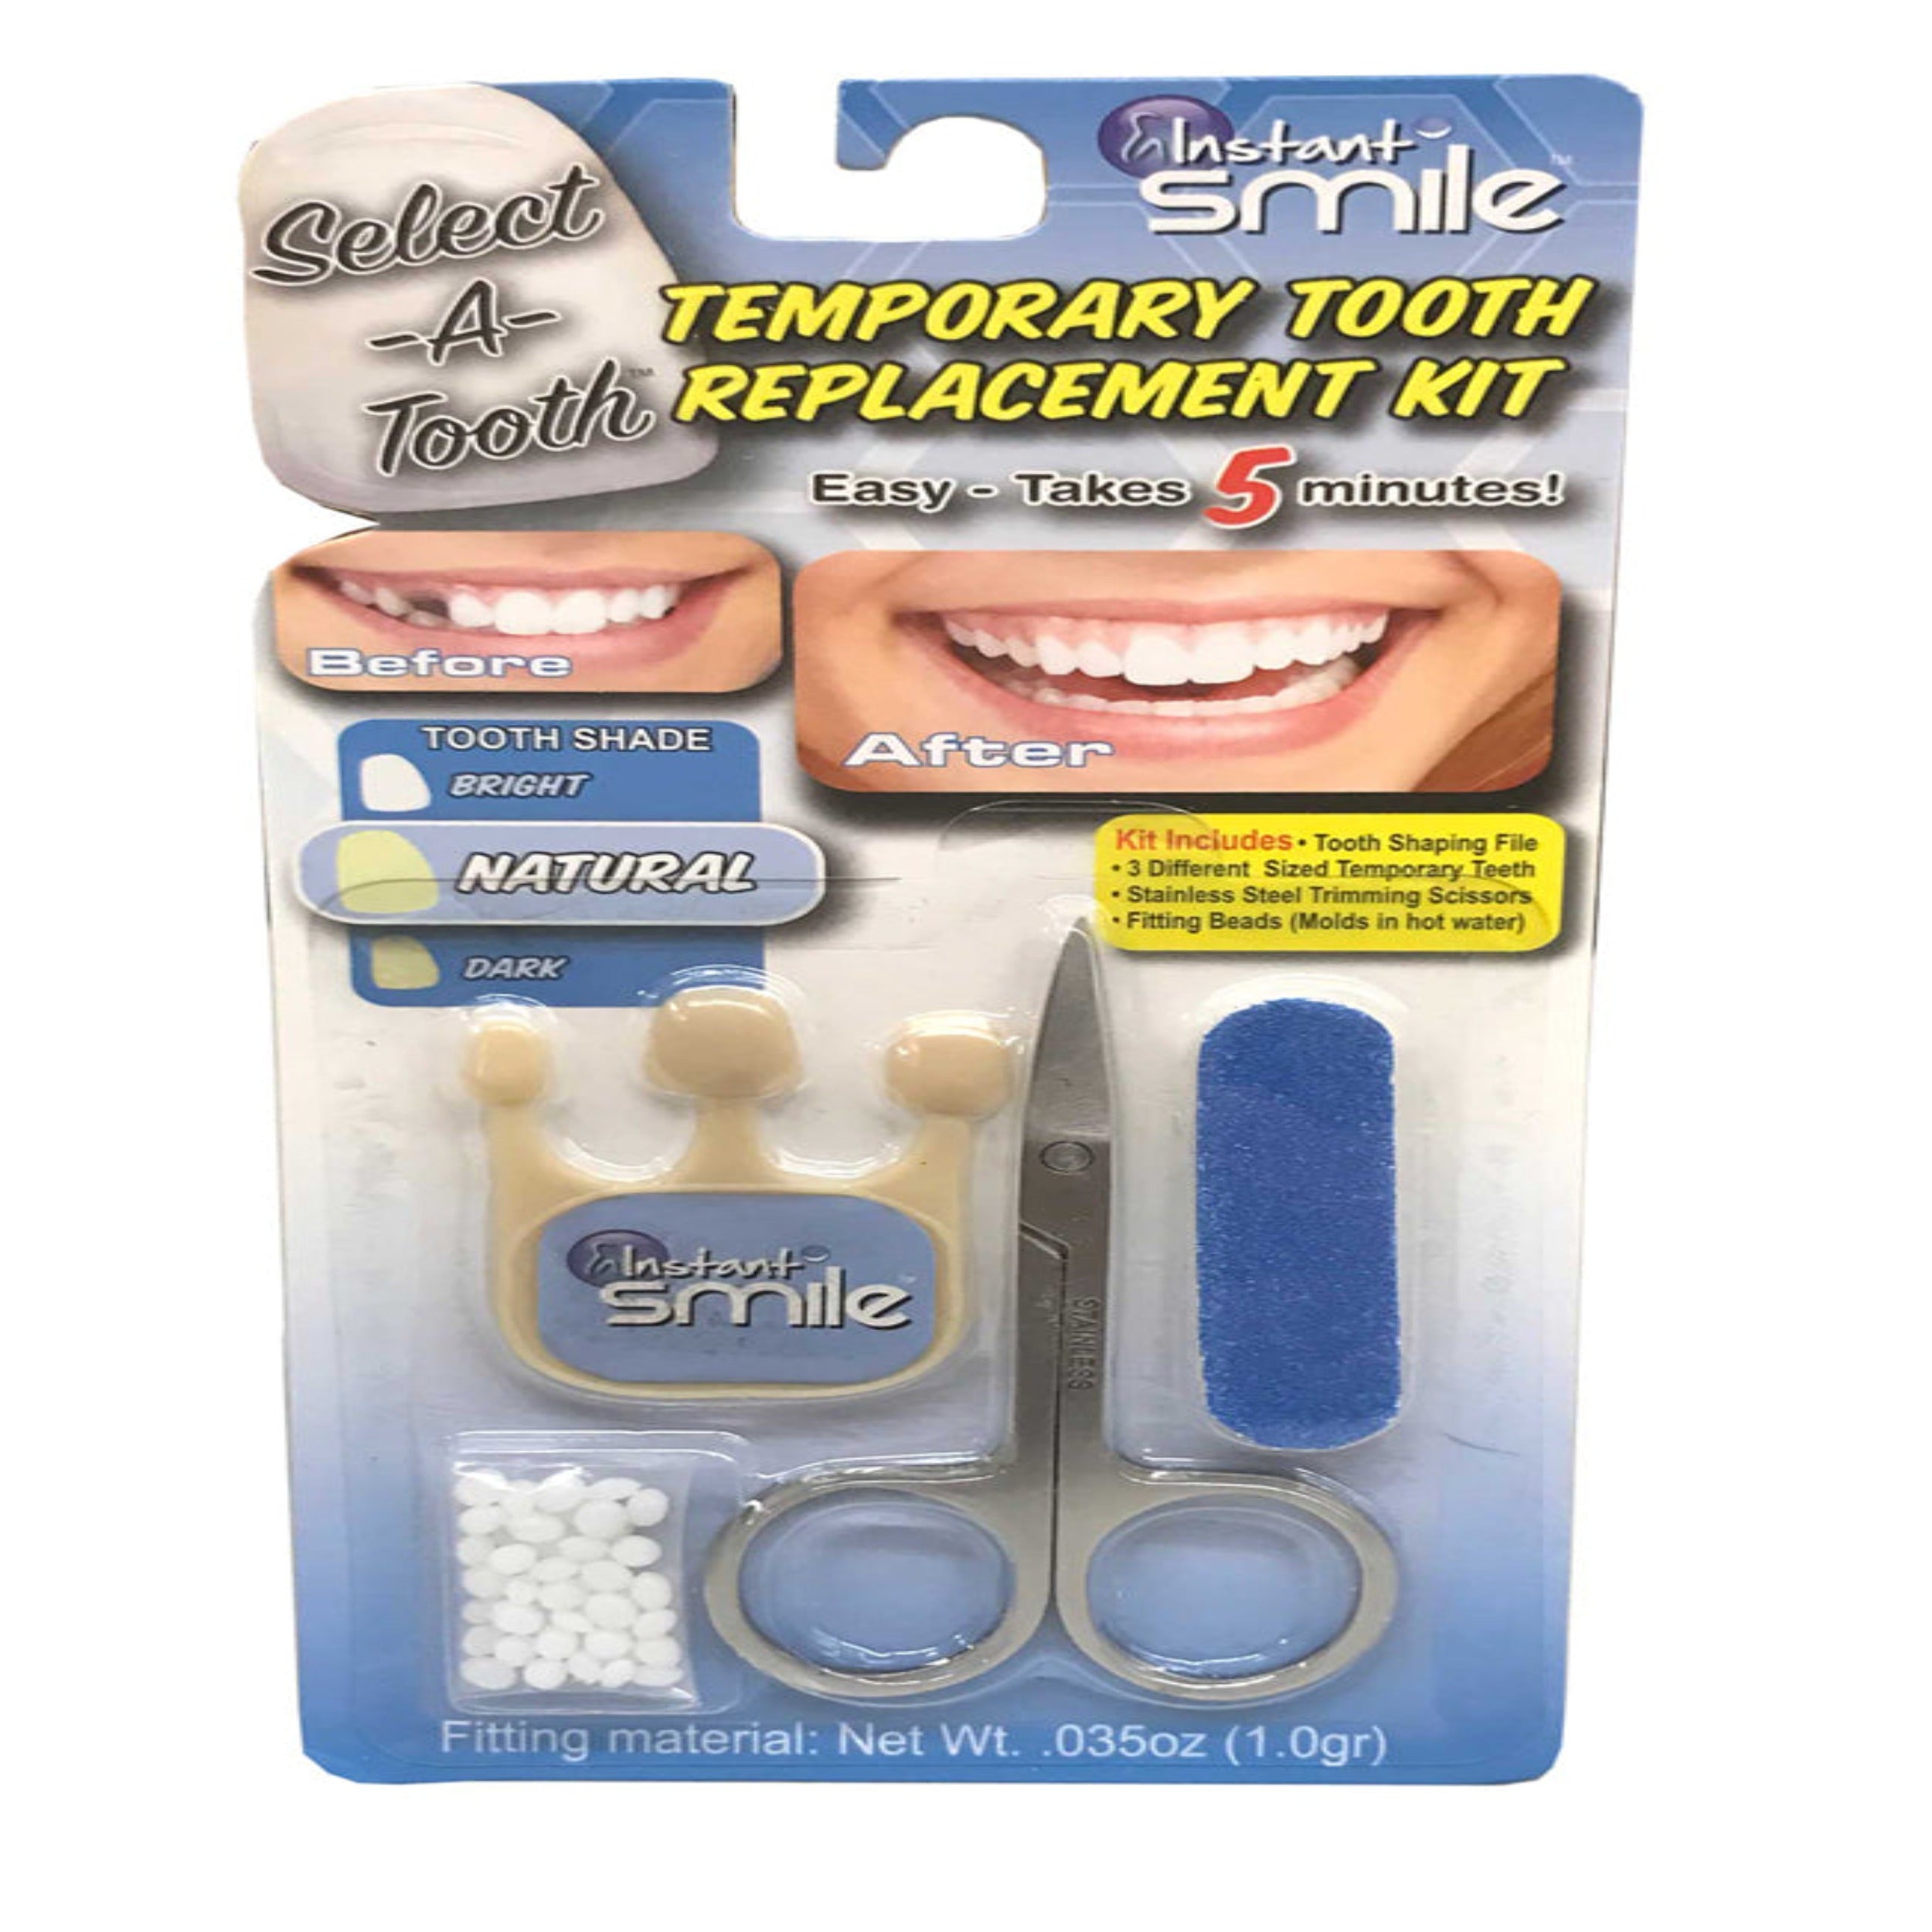 Pro Series - Temporary Tooth Kit - Instant Smile